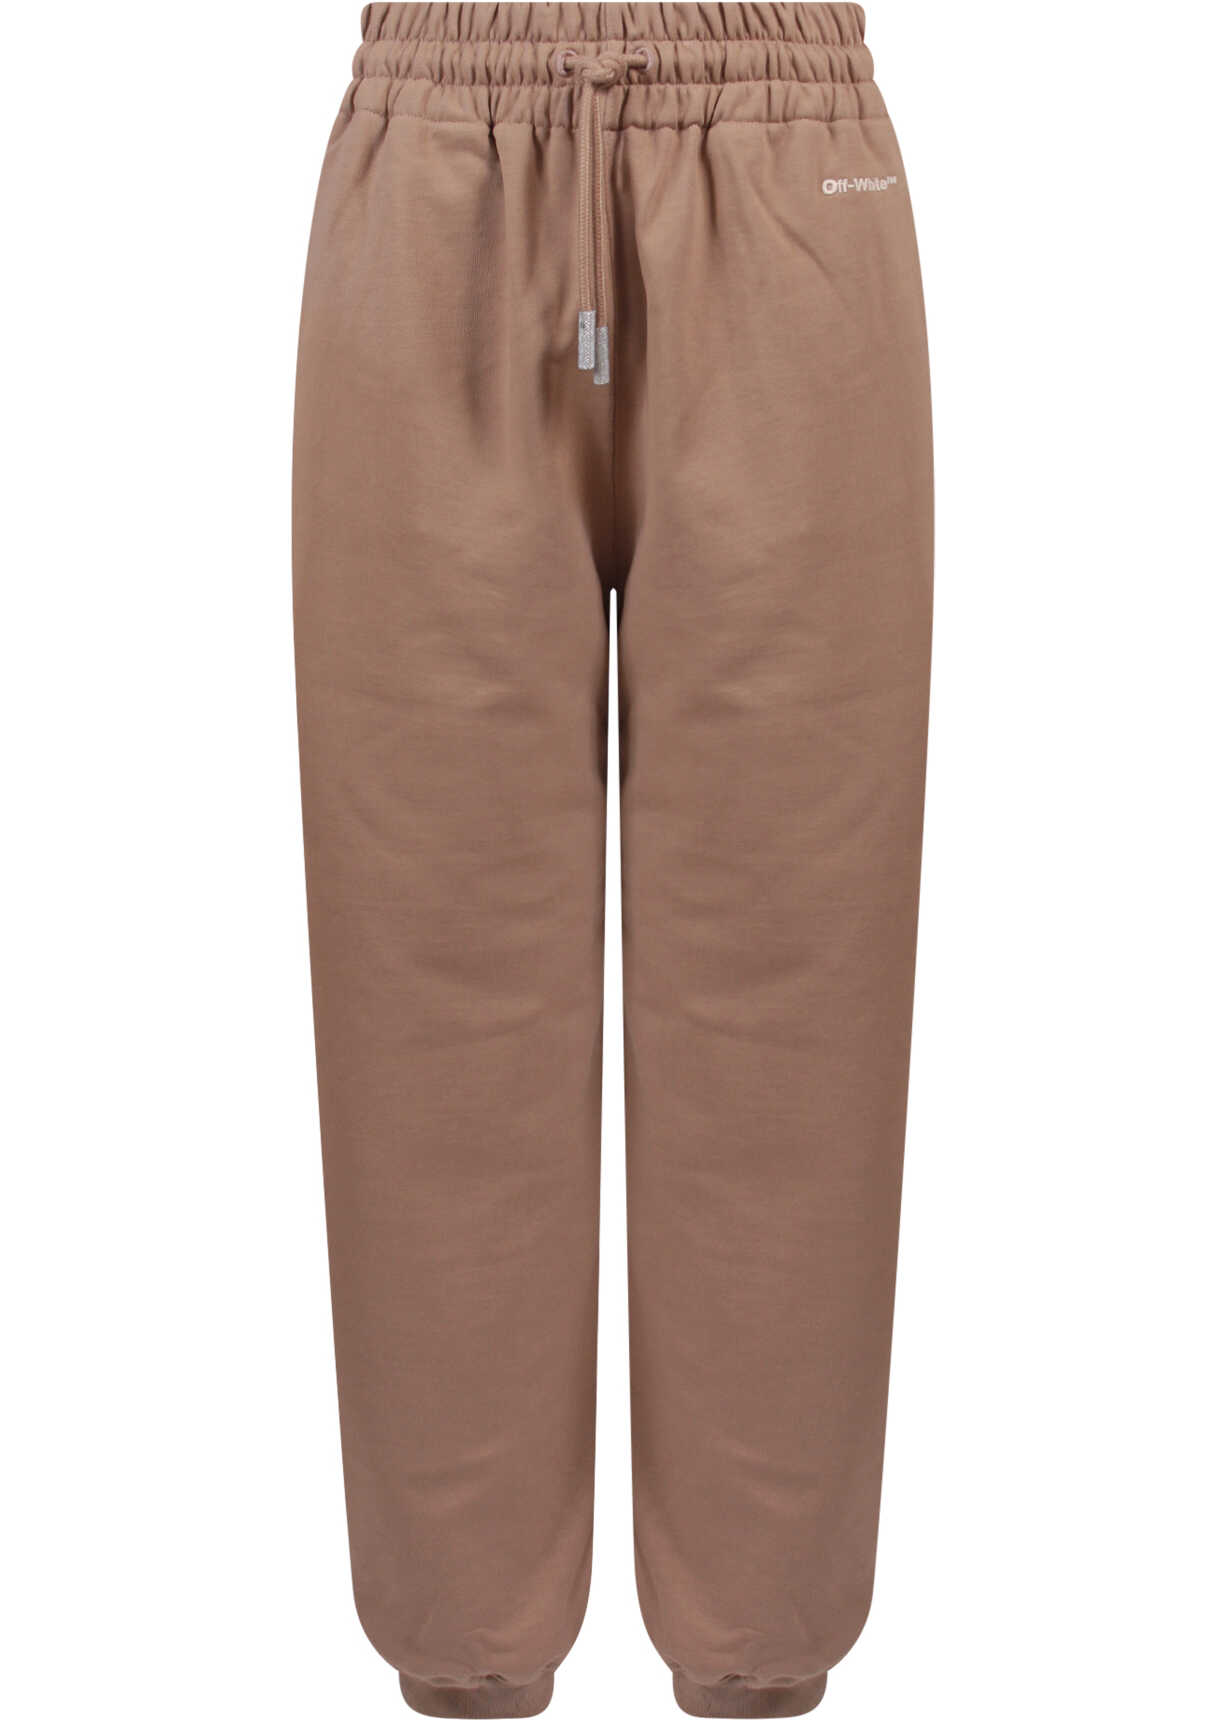 Off-White Trouser Brown